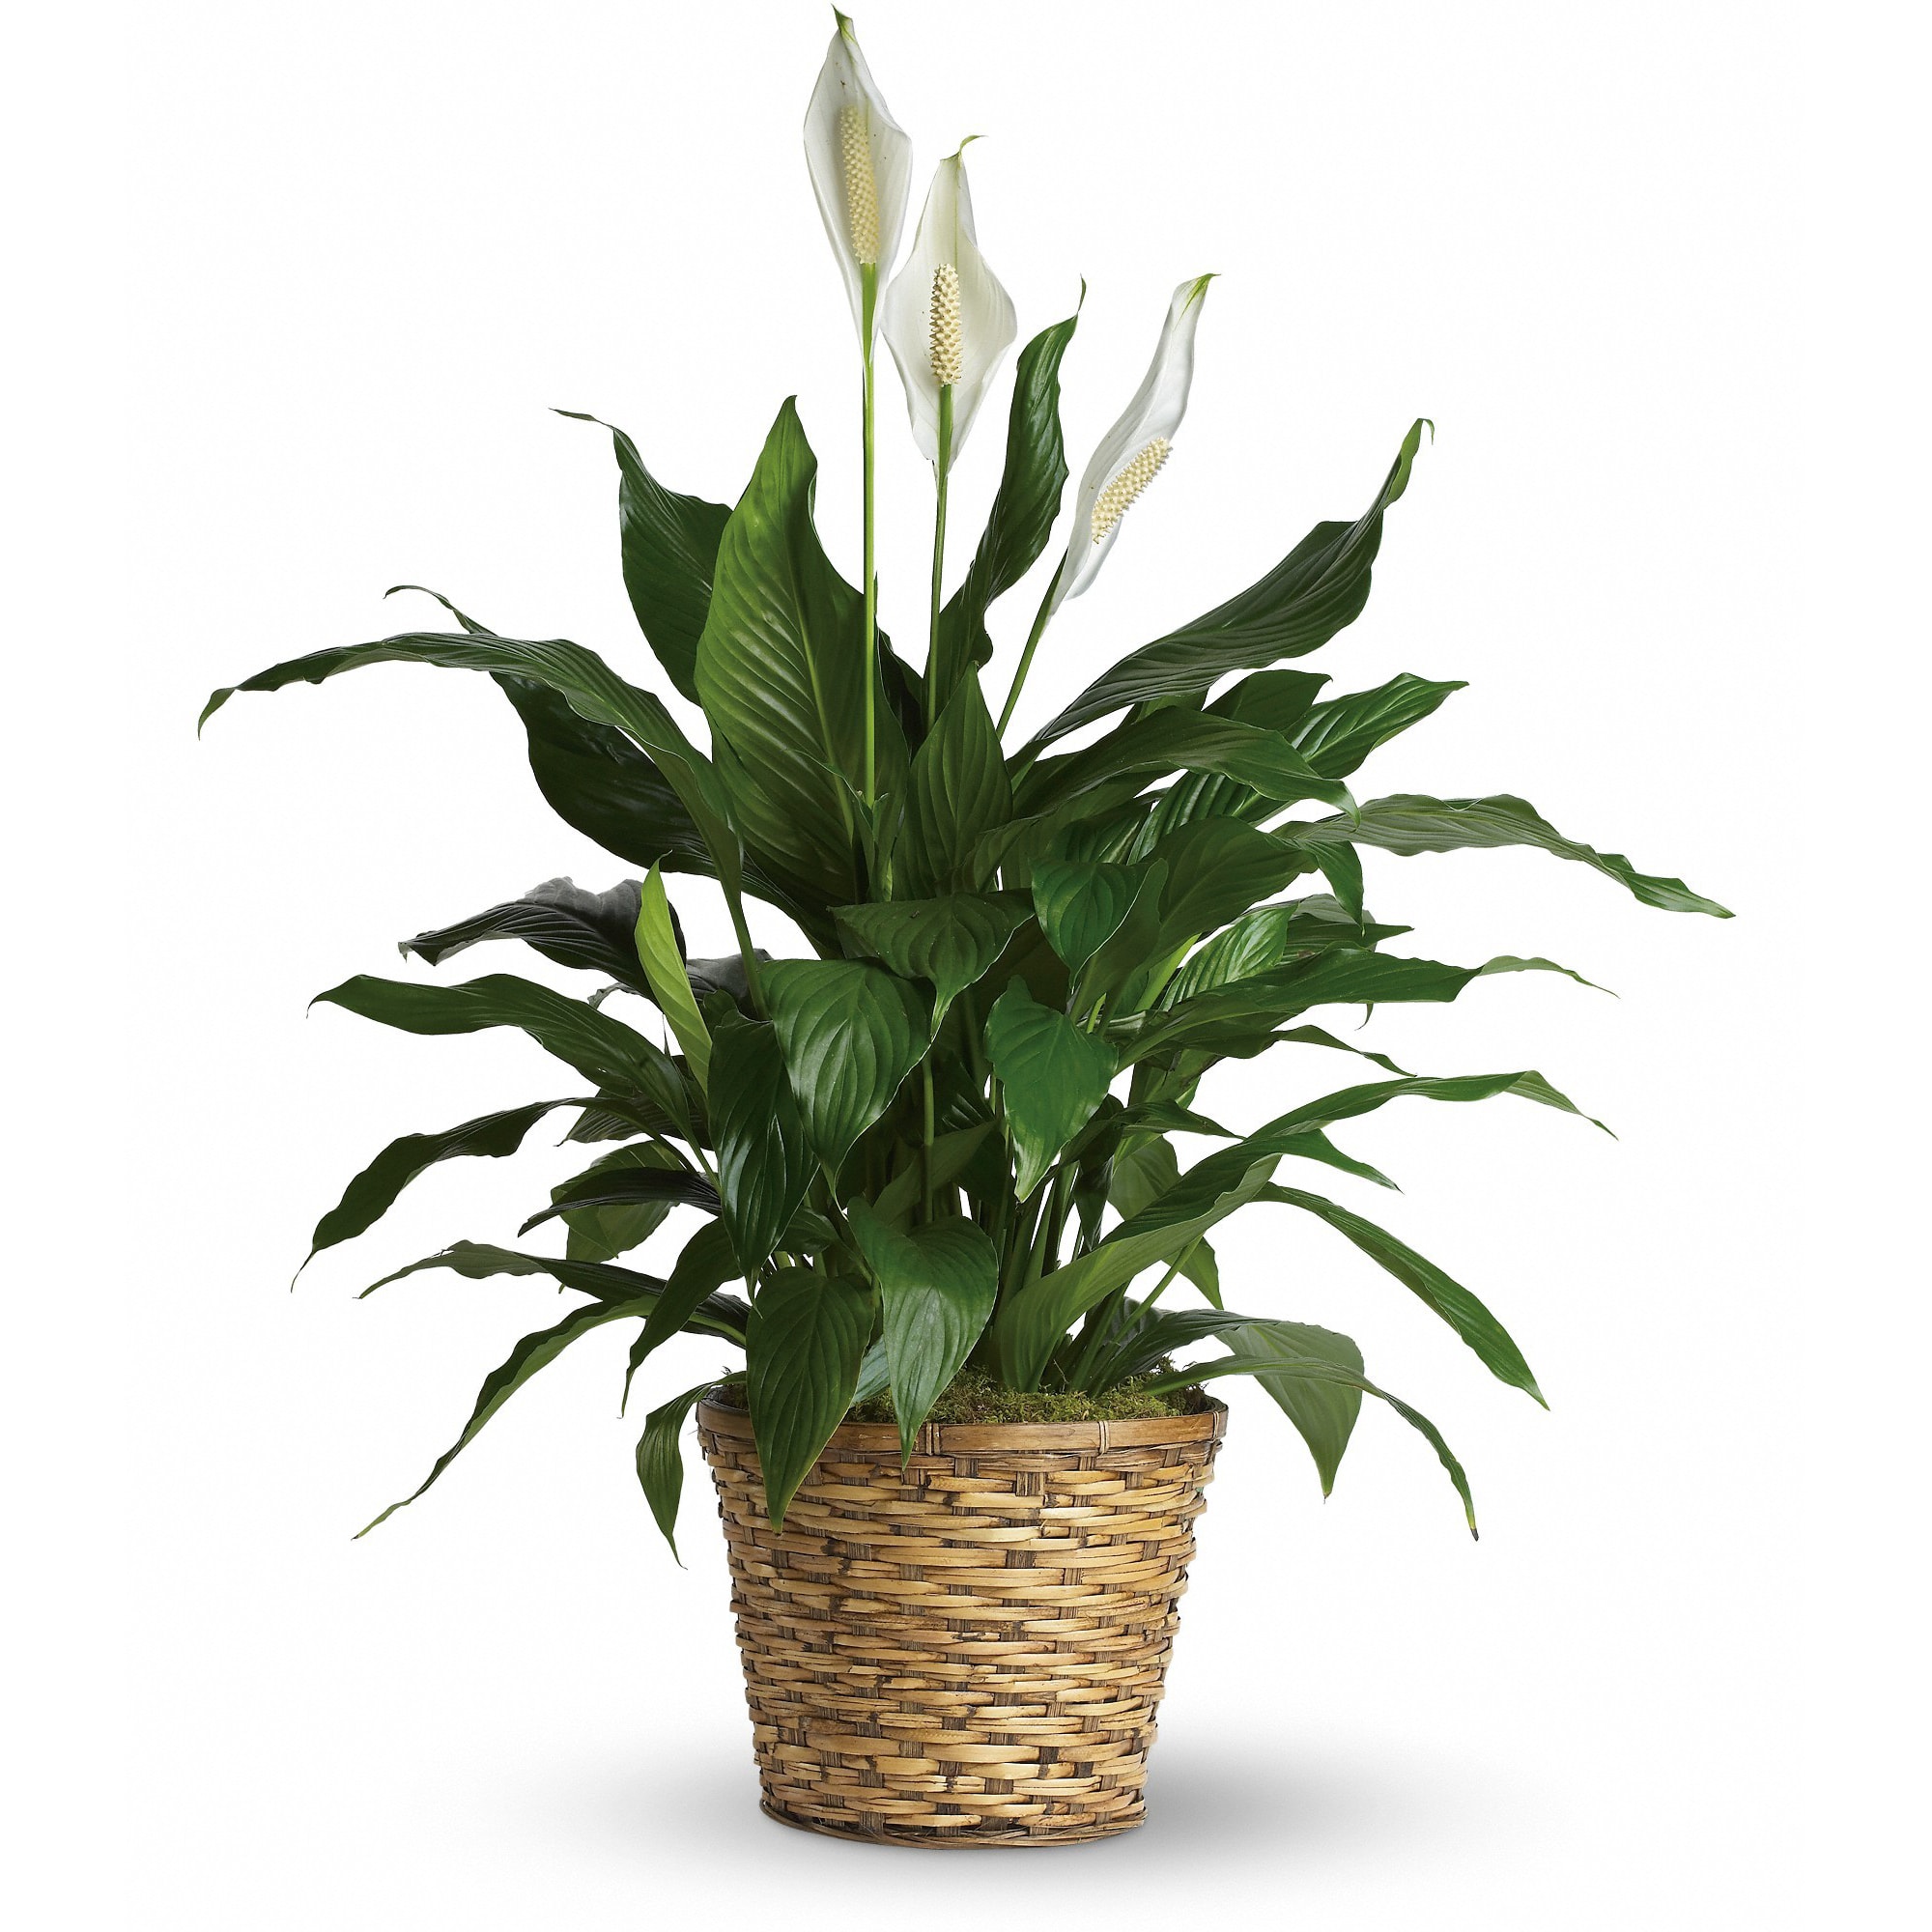 Simply Elegant Spathiphyllum  - Known for its indoor beauty and ability to clear the air of contaminants, this brilliant green plant with dazzling white blossoms makes a perfect gift for almost any occasion. low-maintenance. High quality. Bet you never knew delivering elegance could be this simple.  Spathiphyllum come in a woven wicker basket. Available in two sizes - 6 inch and 8 inch  Add a bow, bow with script and/or willow with butterflies for additional cost. See Cross sell items    Approximately 30 1/2&quot; W x 37&quot; H  Orientation: N/A  As Shown : T105-2A